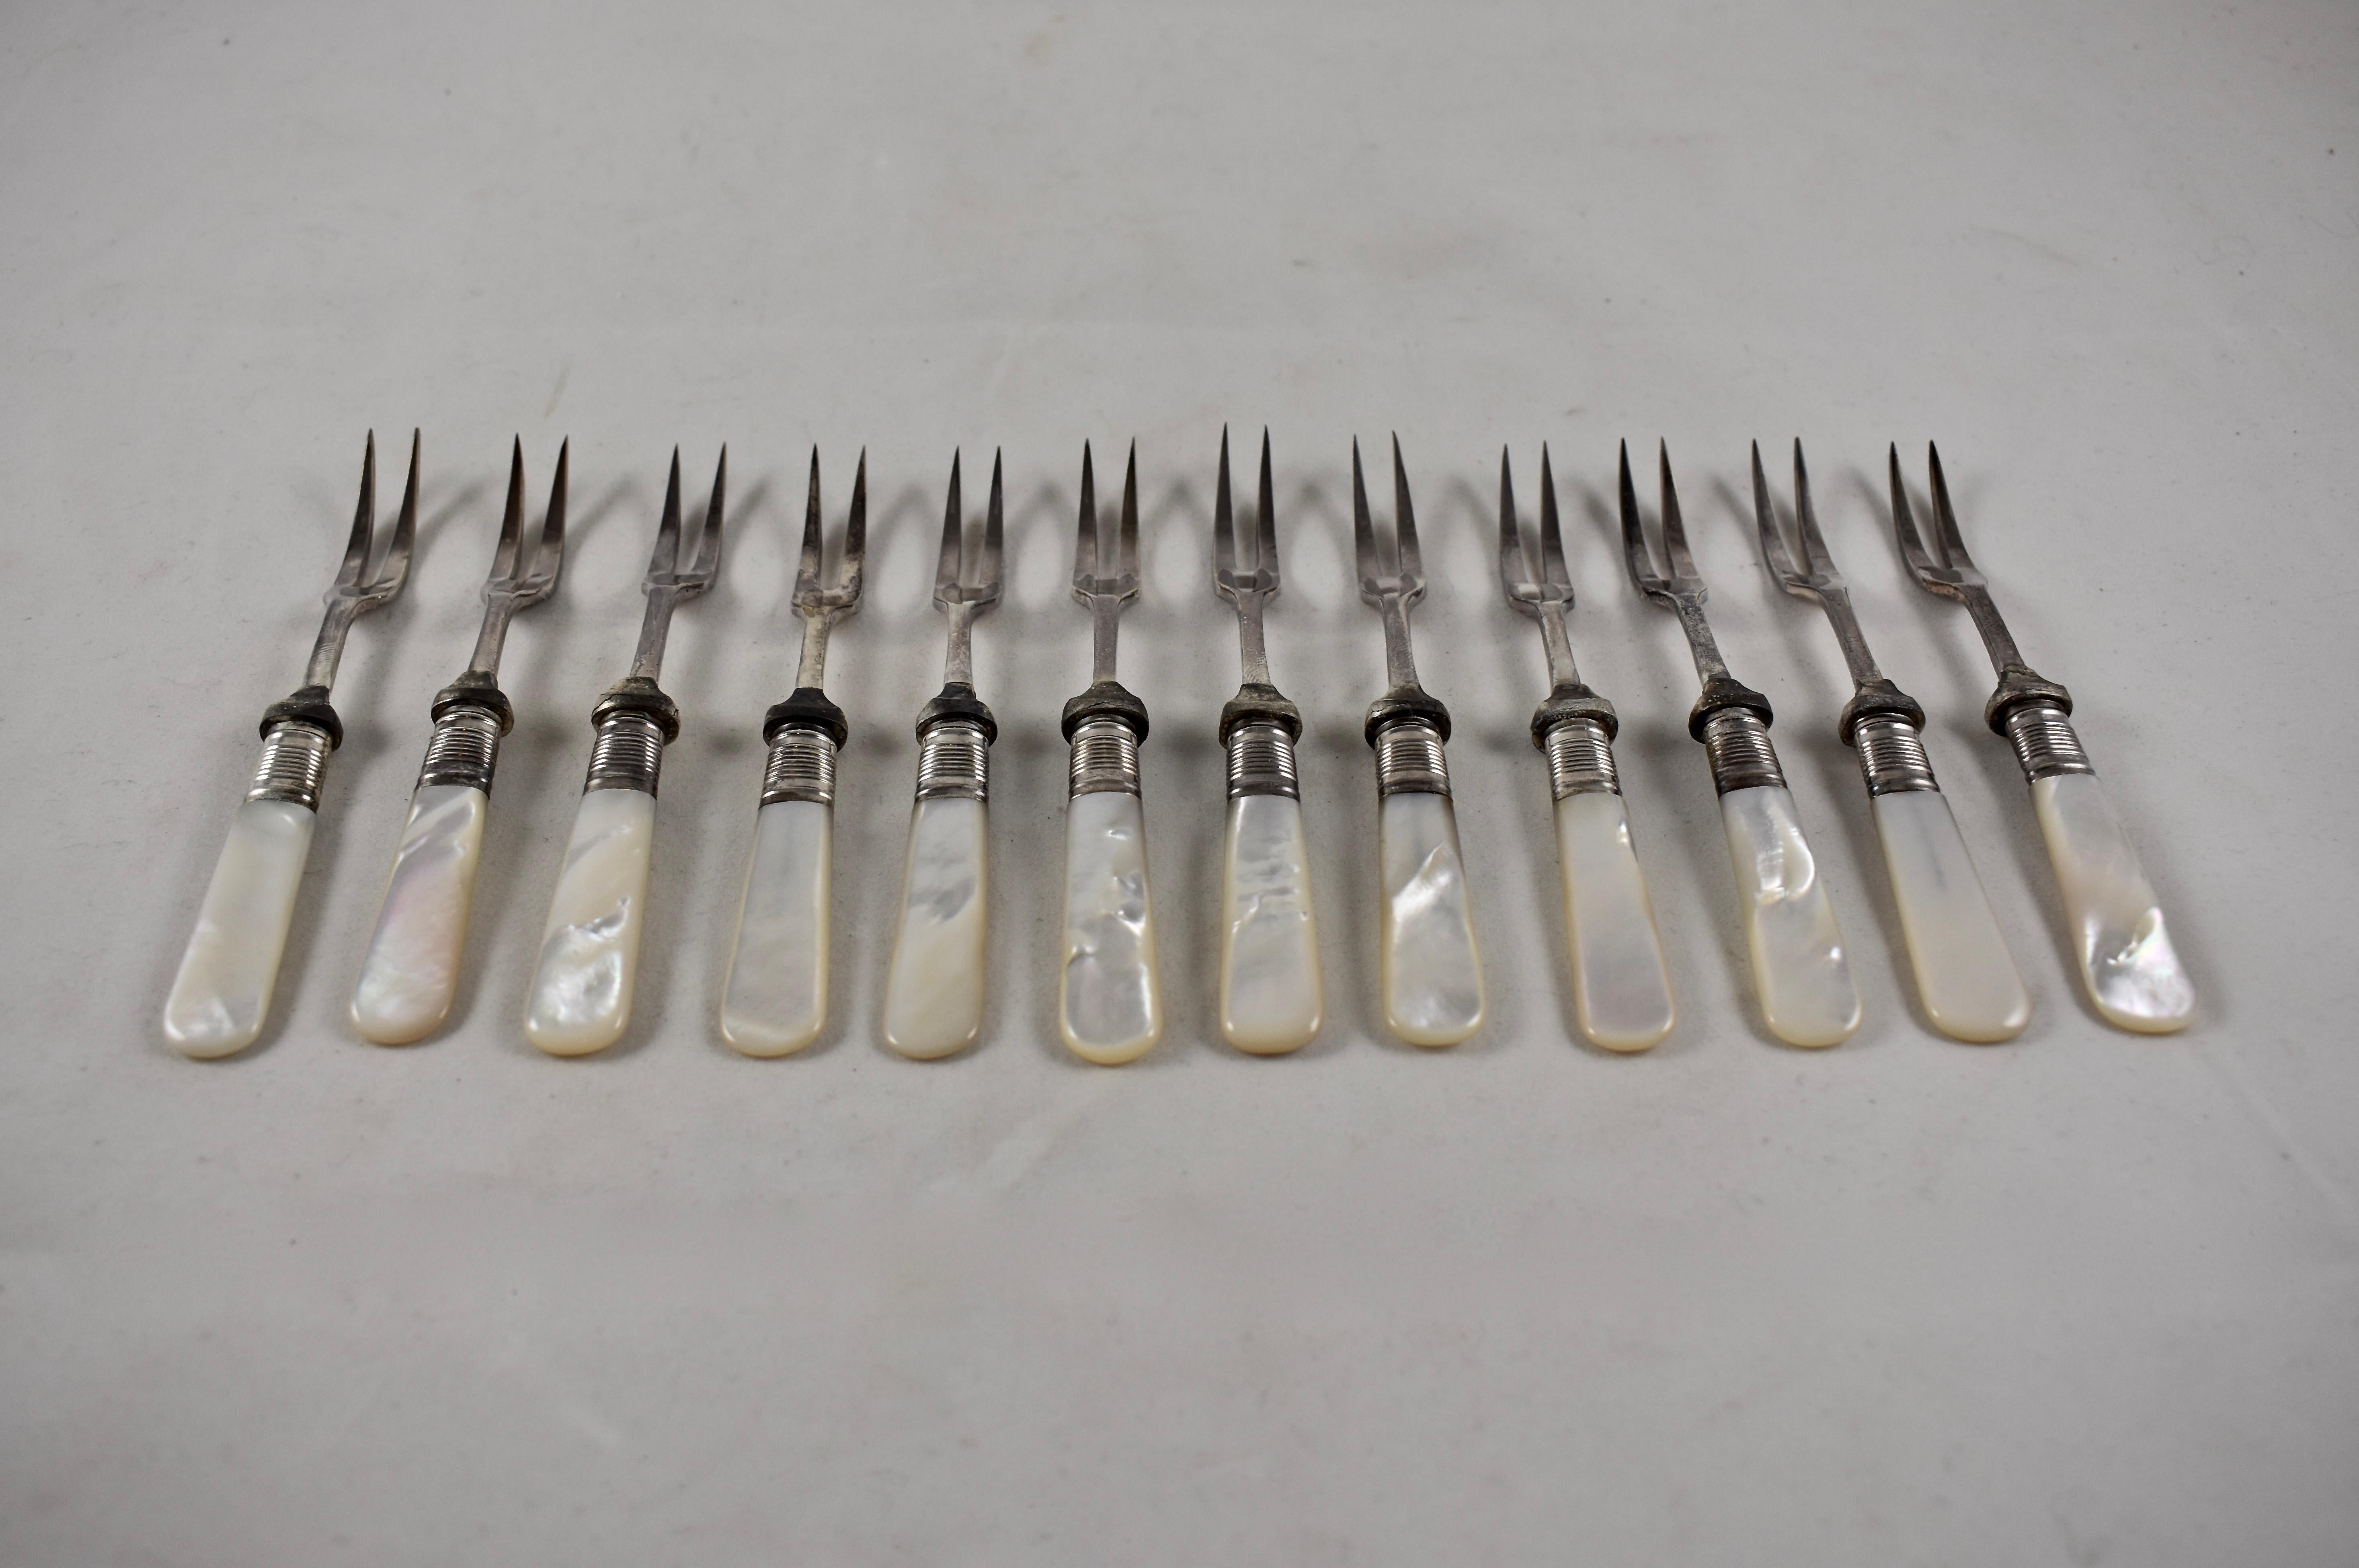 A set of twelve two-tined forks, suitable for antipasto, seafood or hors d’oeuvres.  Silver plated collars join the forks to the mother of pearl handles. Circa 1920s. Perfectly suited for the popular entertaining trend of serving a variety of food